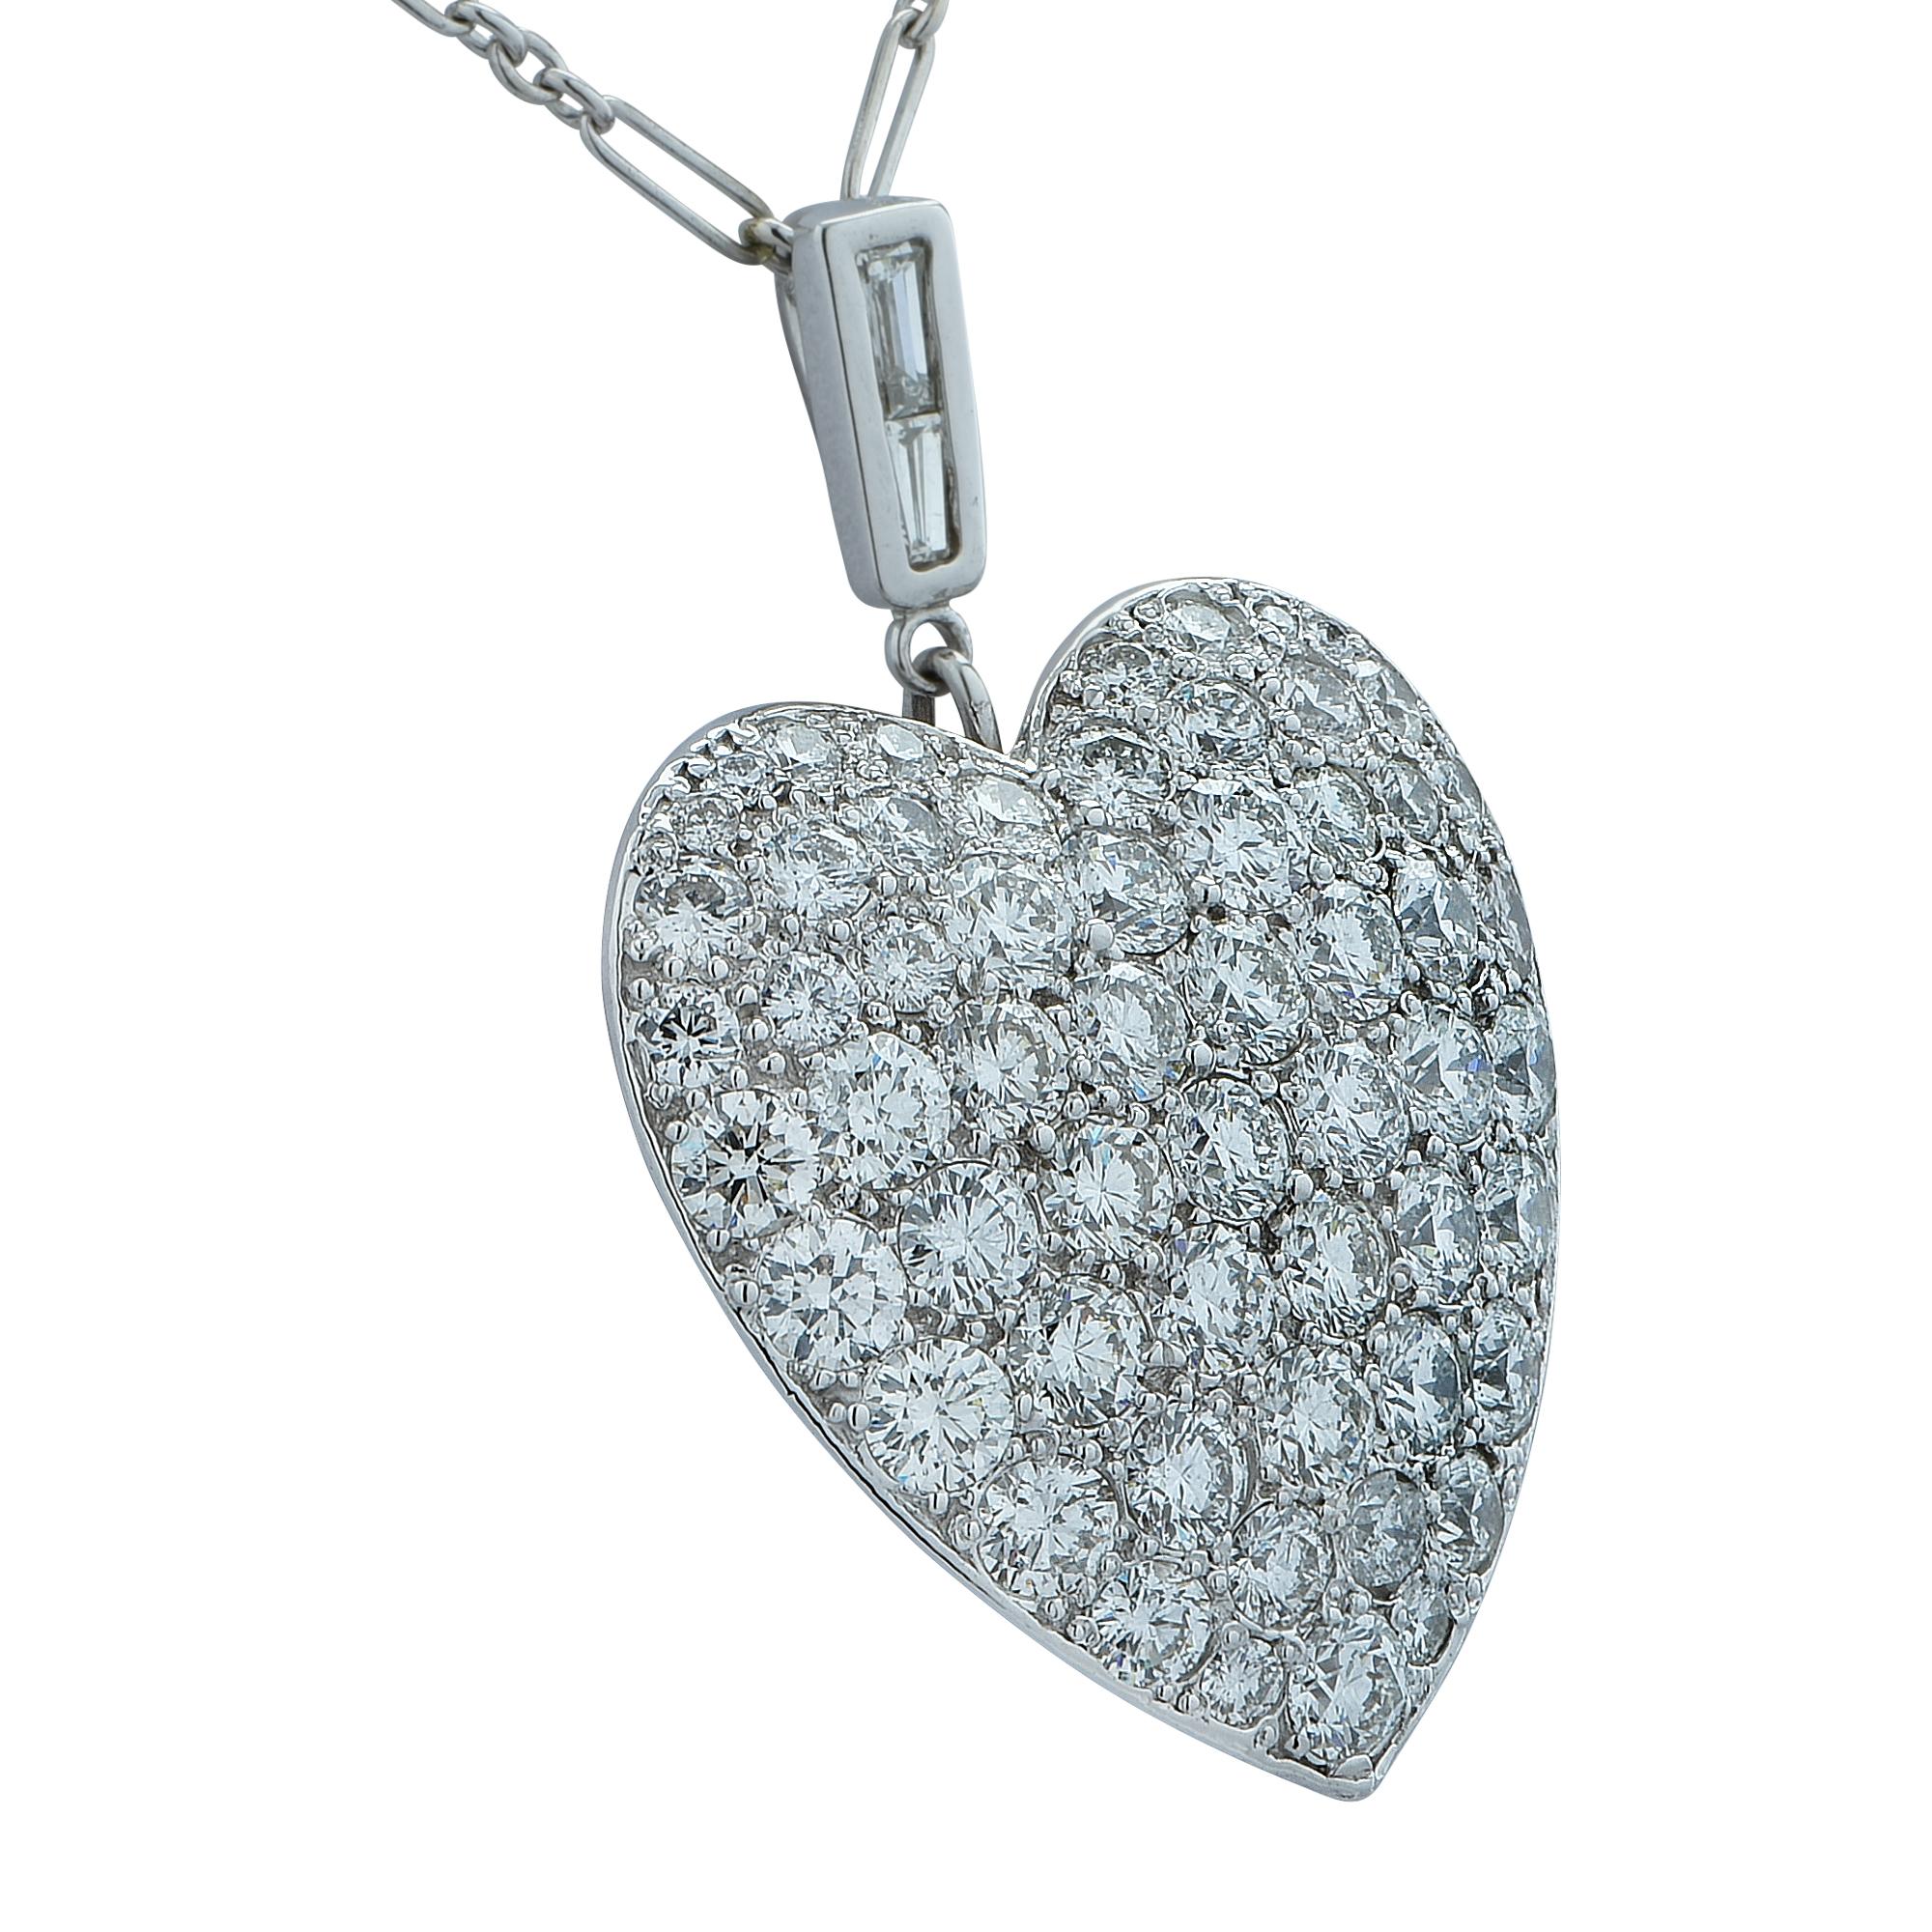 Breathtaking heart pendant and necklace, custom made in platinum, featuring 68 round brilliant cut diamonds and 2 baguettes, weighing approximately 7 carats total, G color, VS clarity. The heart measures 1.12 inches in length and 1 inch in width.